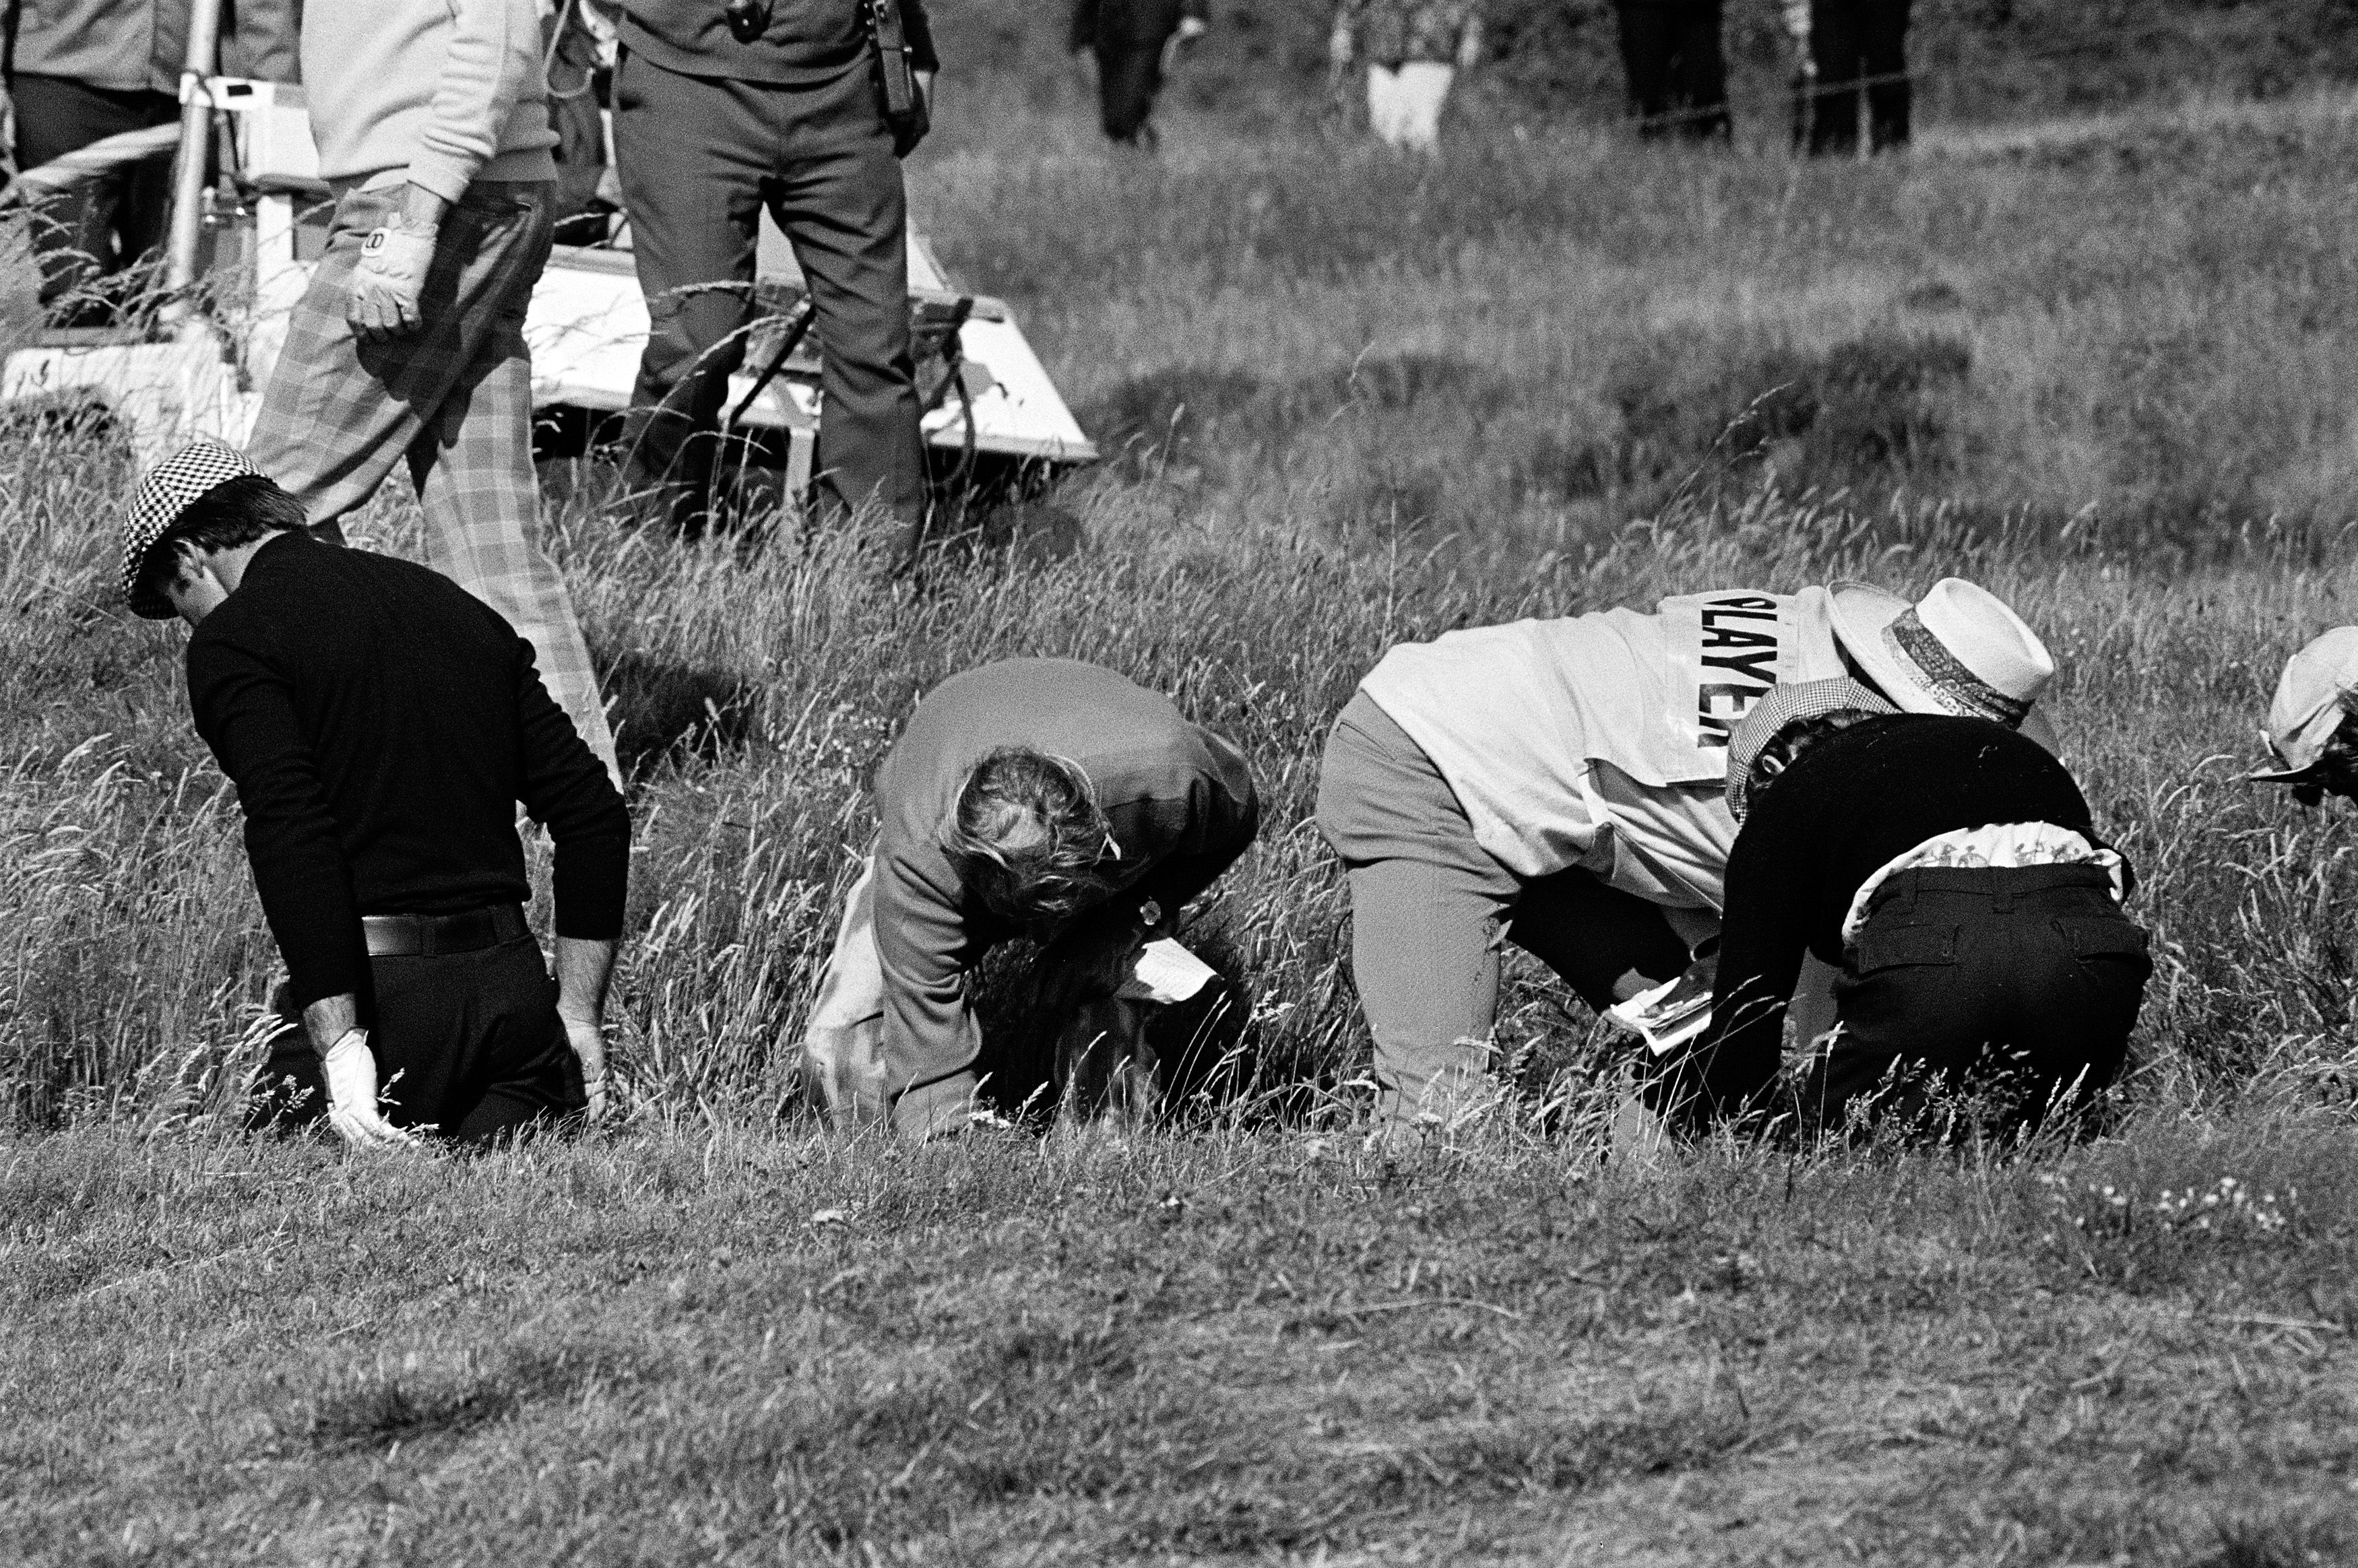 Gary Player and Rabbit Dyer search for Player's lost ball on the 17th hole of Lytham at the 1974 Open Championship.